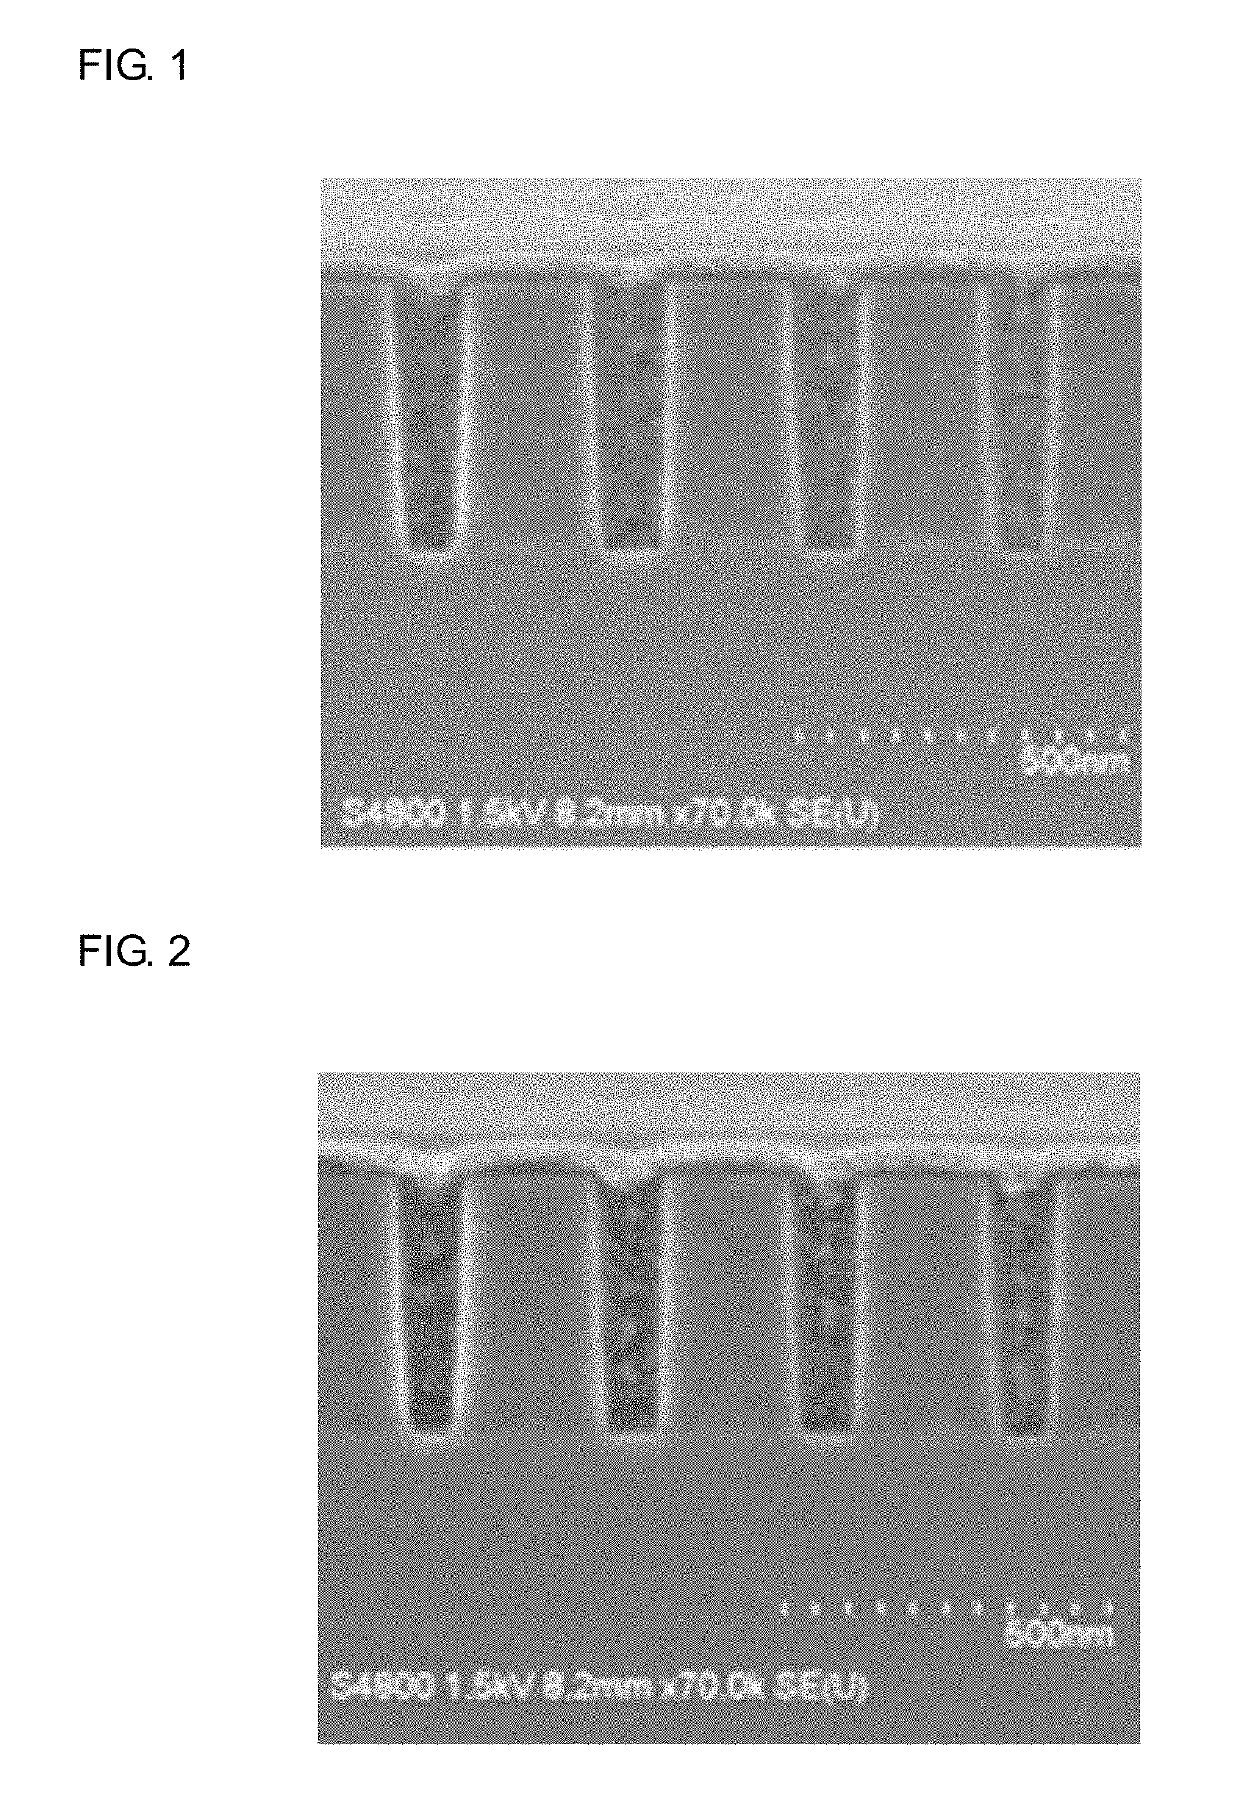 Cationically polymerizable resist underlayer film-forming composition